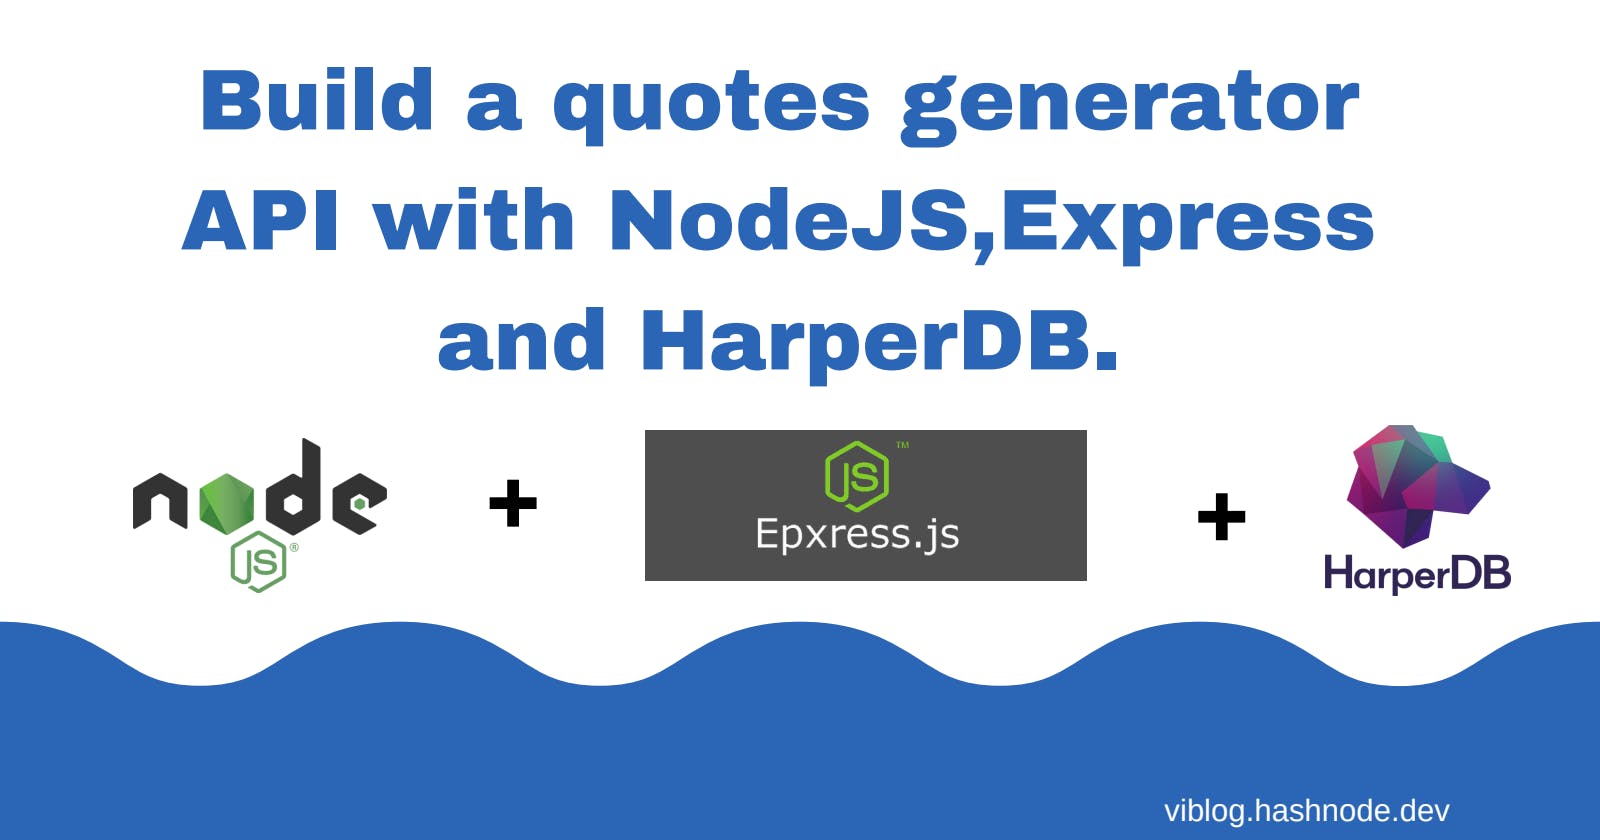 Build a quotes generator API with NodeJS,Express and HarperDB.